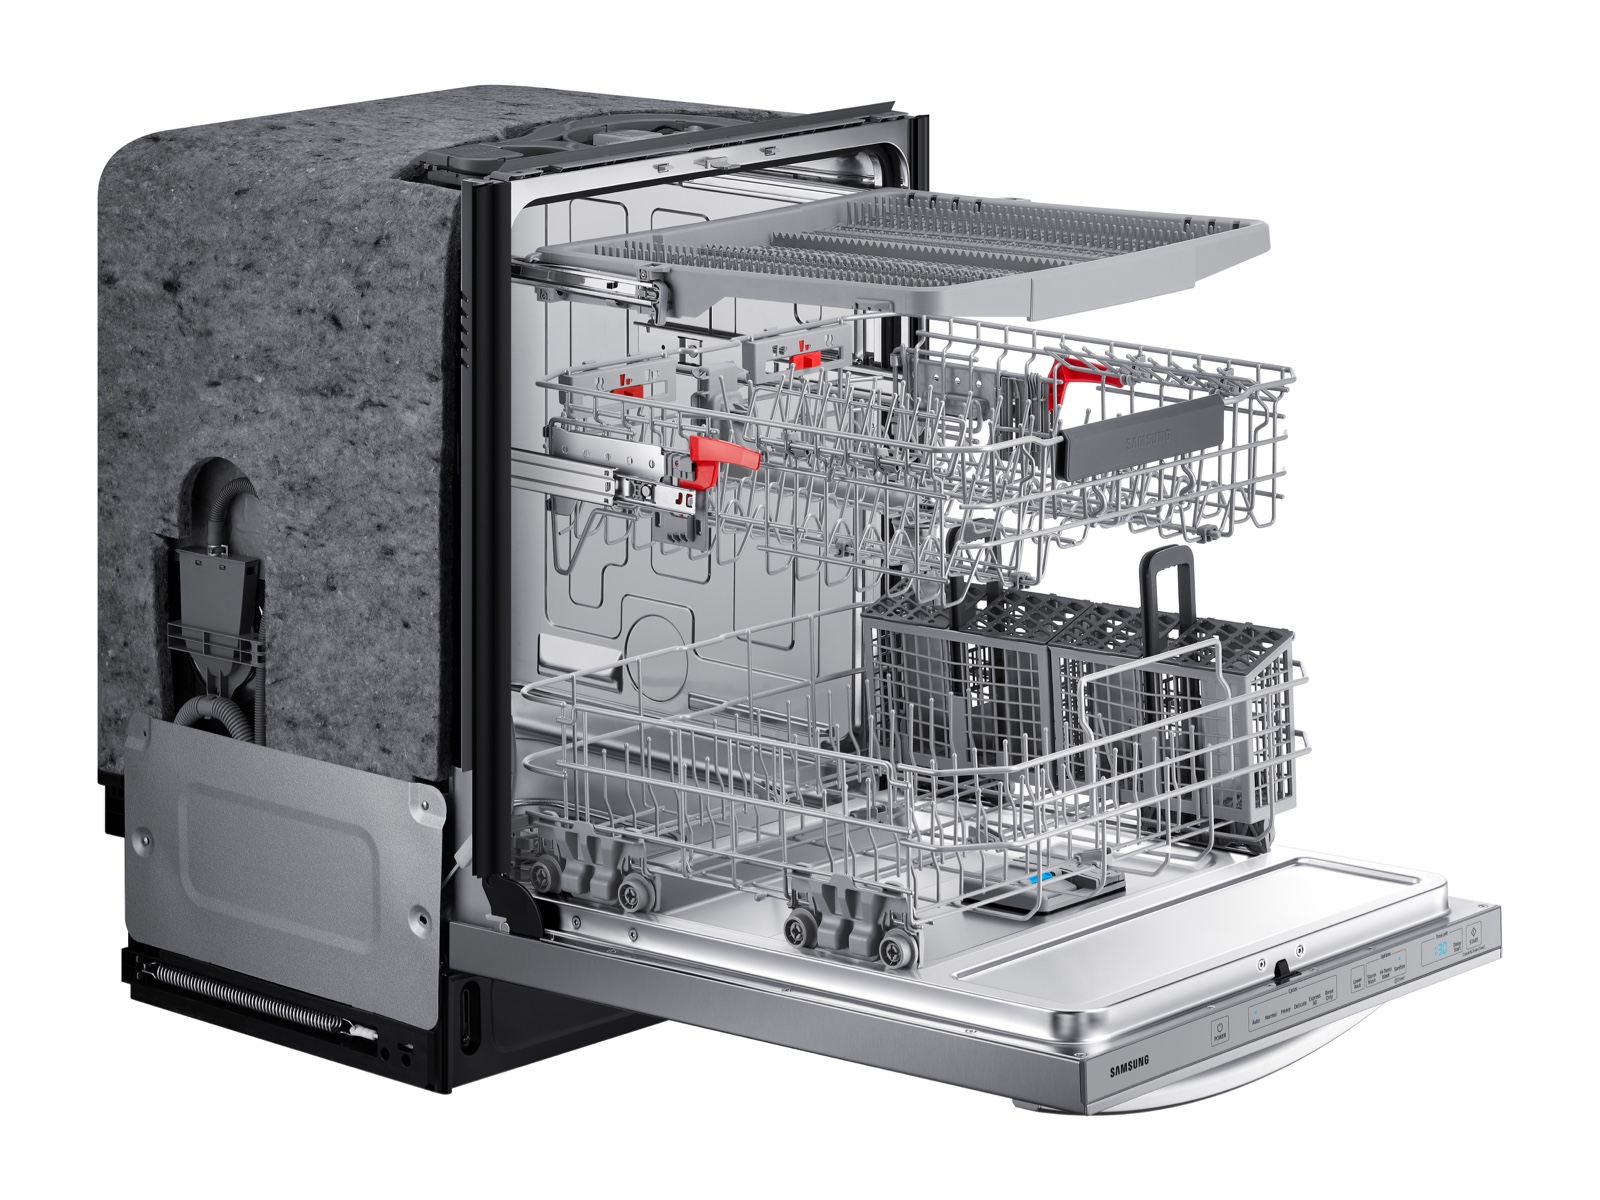 Samsung StormWash 24 Top Control Built-In Dishwasher with AutoRelease Dry,  3rd Rack, 48 dBA Stainless Steel DW80R5060US/AA - Best Buy